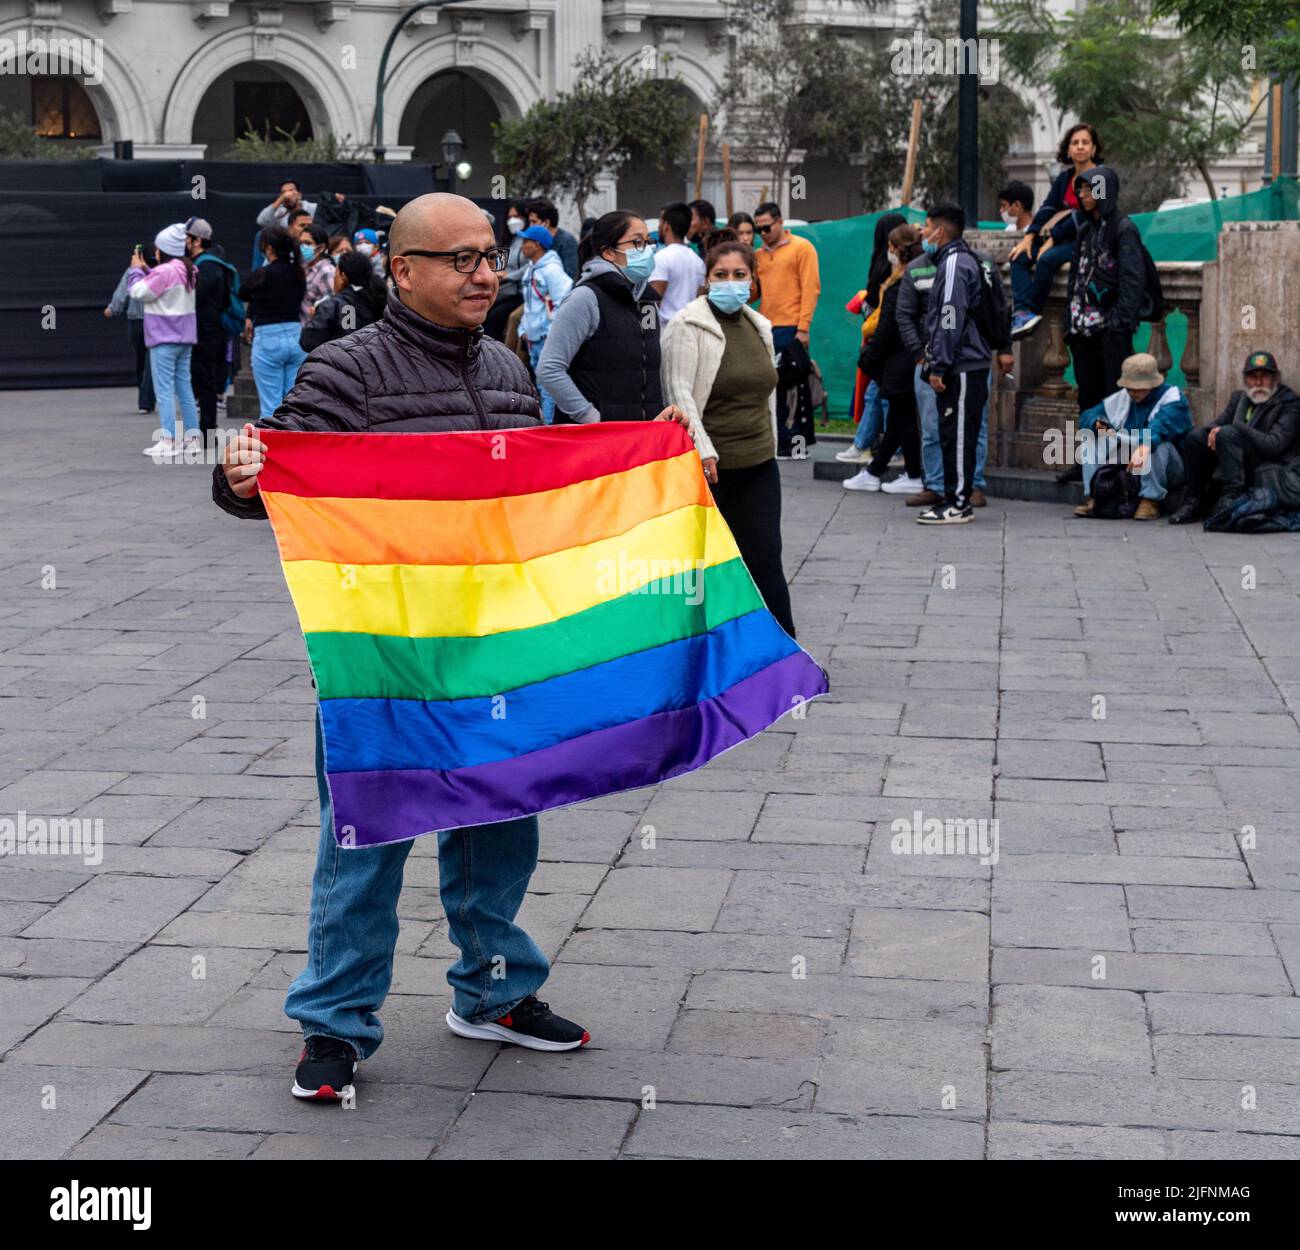 Photo of a man posing with a rainbow flag at the Plaza San Martin, the culmination of Lima's Marcha del Orgullo, the city's annual Pride march event. Stock Photo